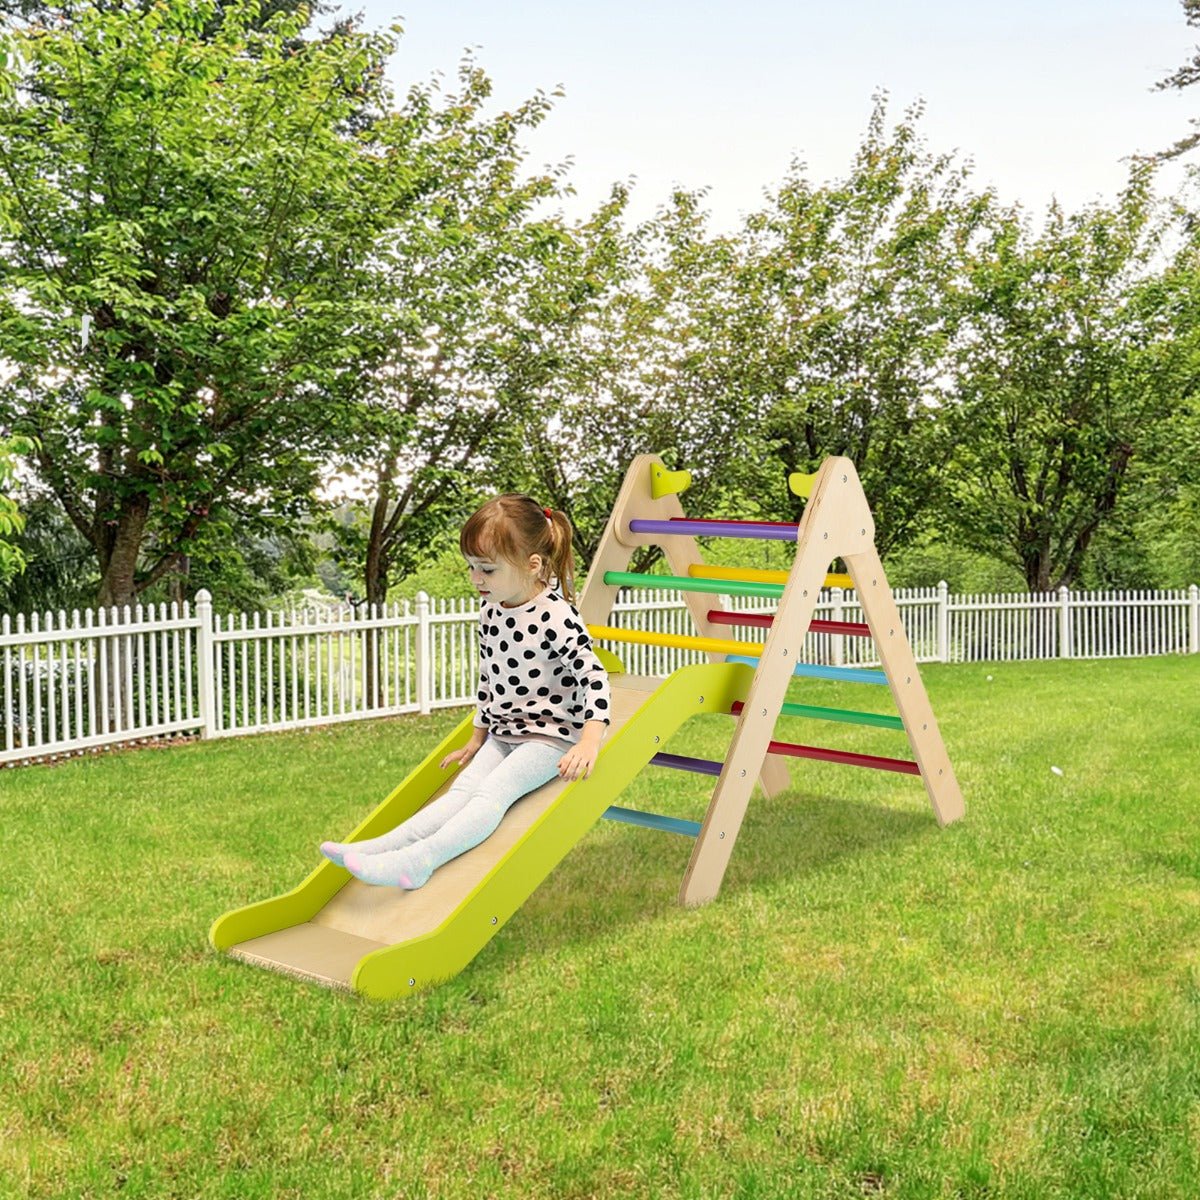 Wooden Climbing Triangle with Slide - Active Adventure for Children